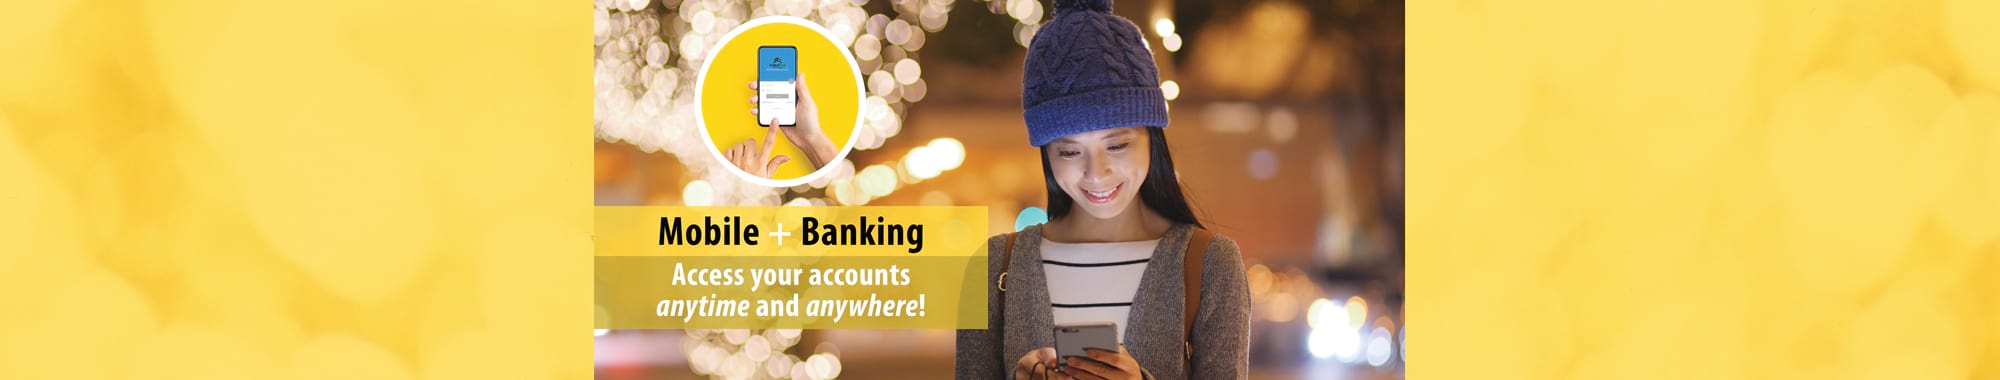 Mobile Banking - Access your accounts anytime and anywhere!